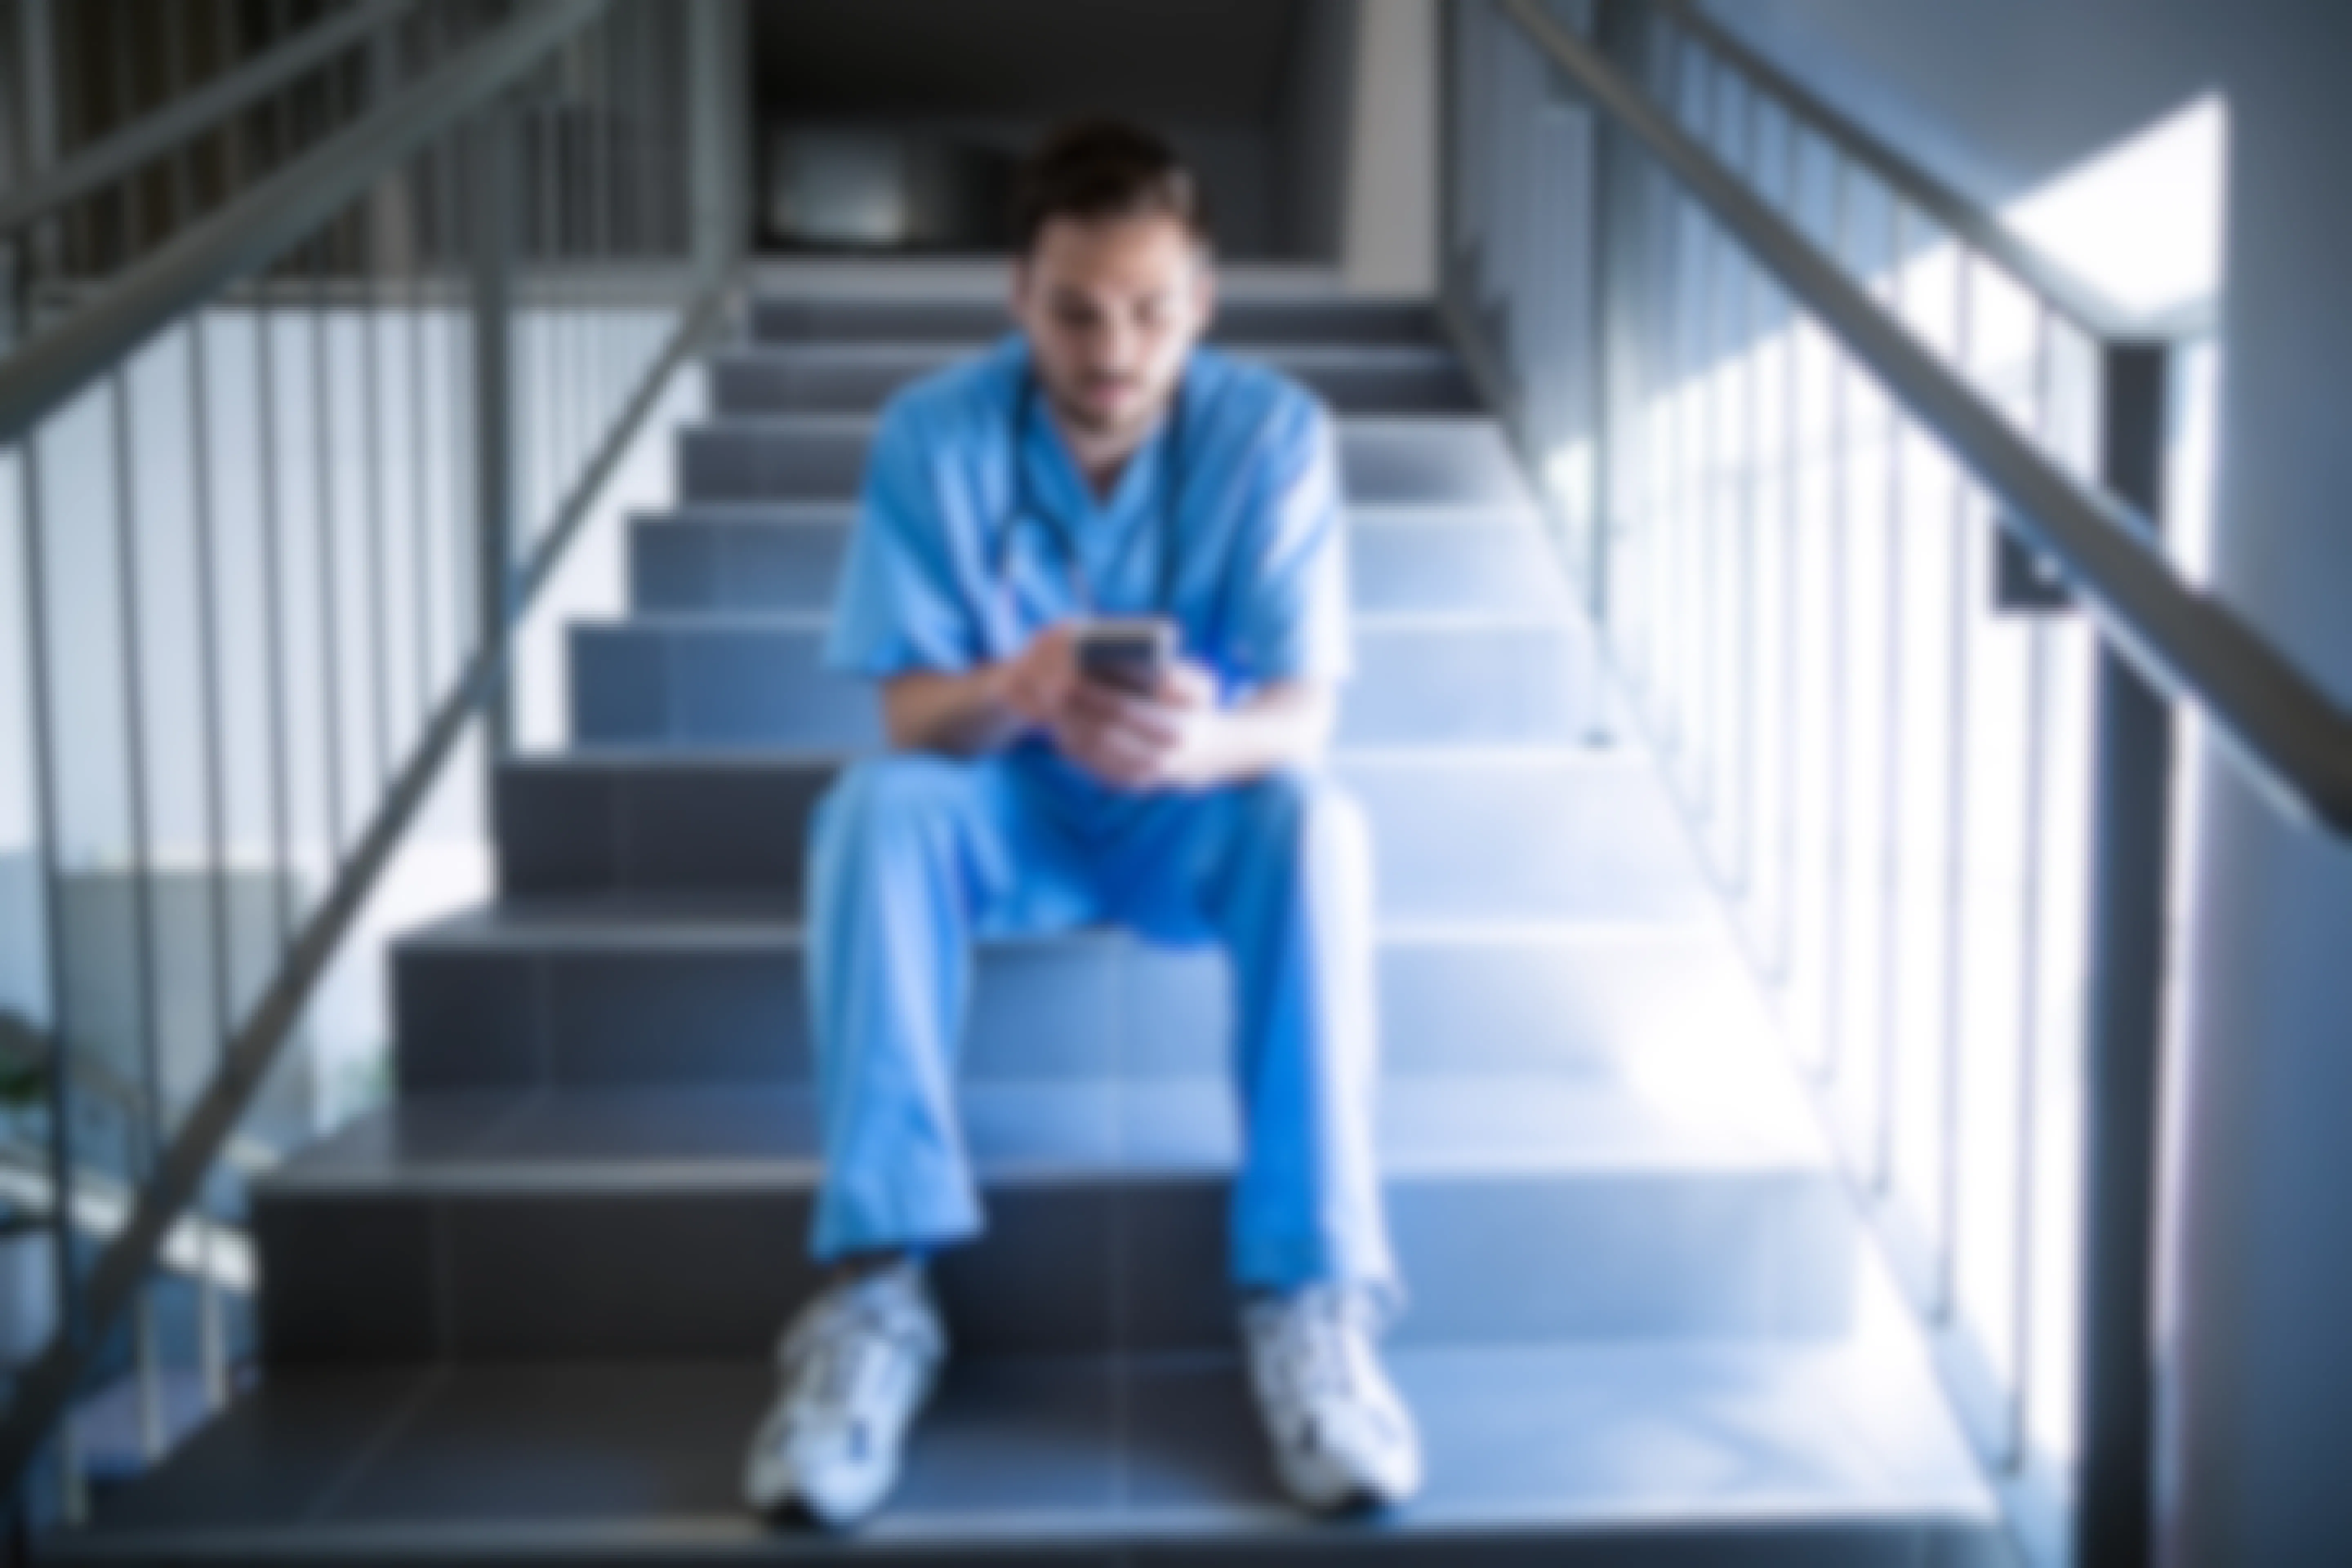 Male Nurse on mobile phone while sitting on stairs